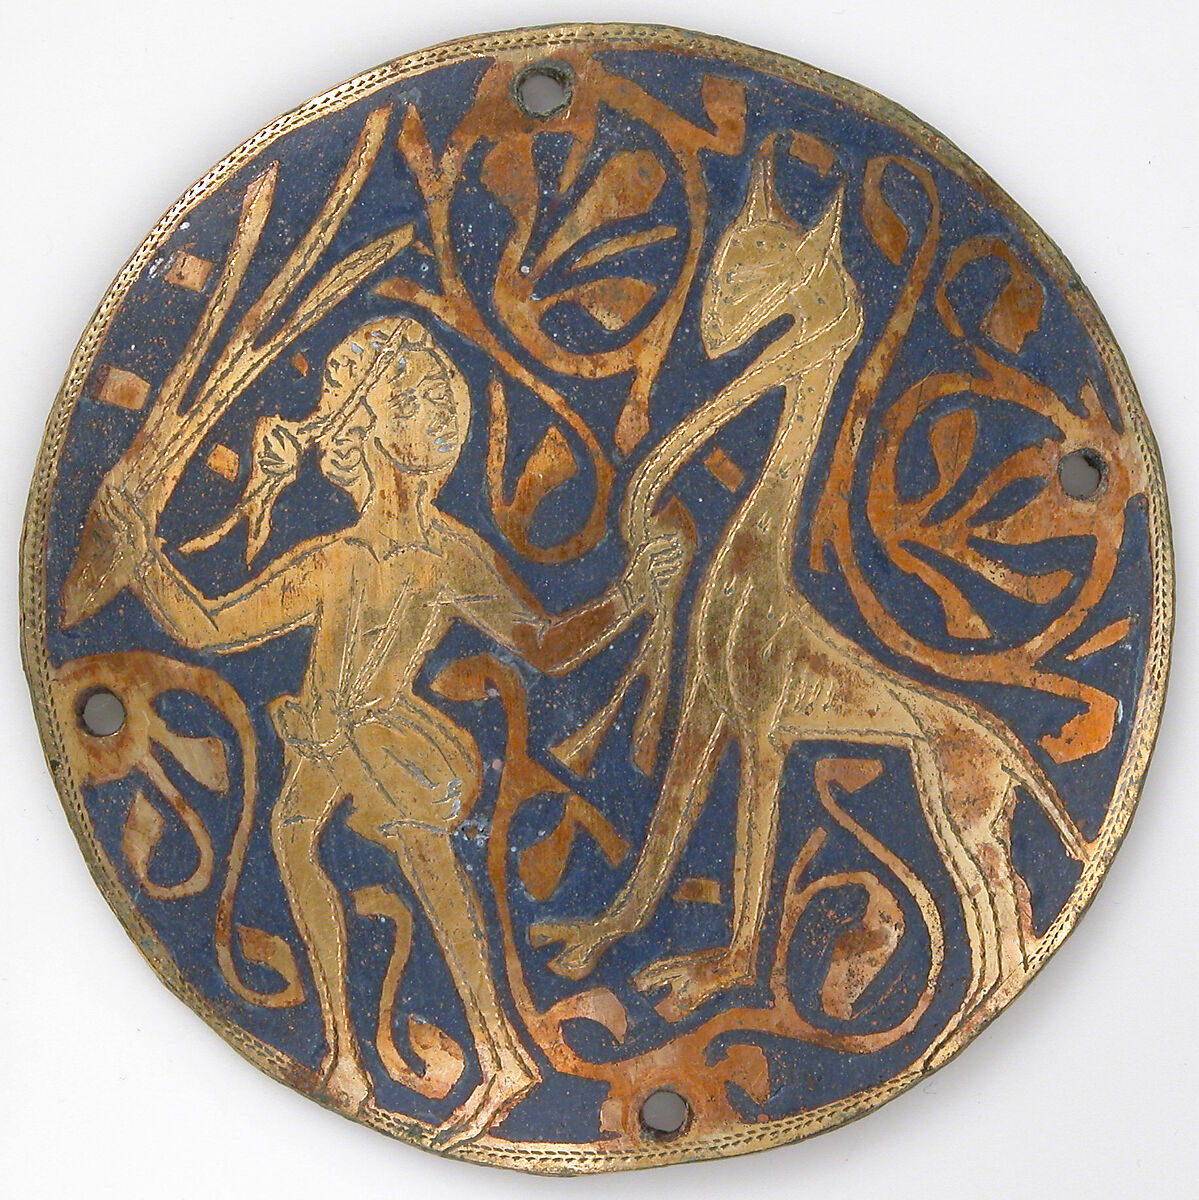 Medallion with Youth Leading Long-necked Animal, Copper: engraved and gilt; champlevé enamel: medium and light blue and white, French 